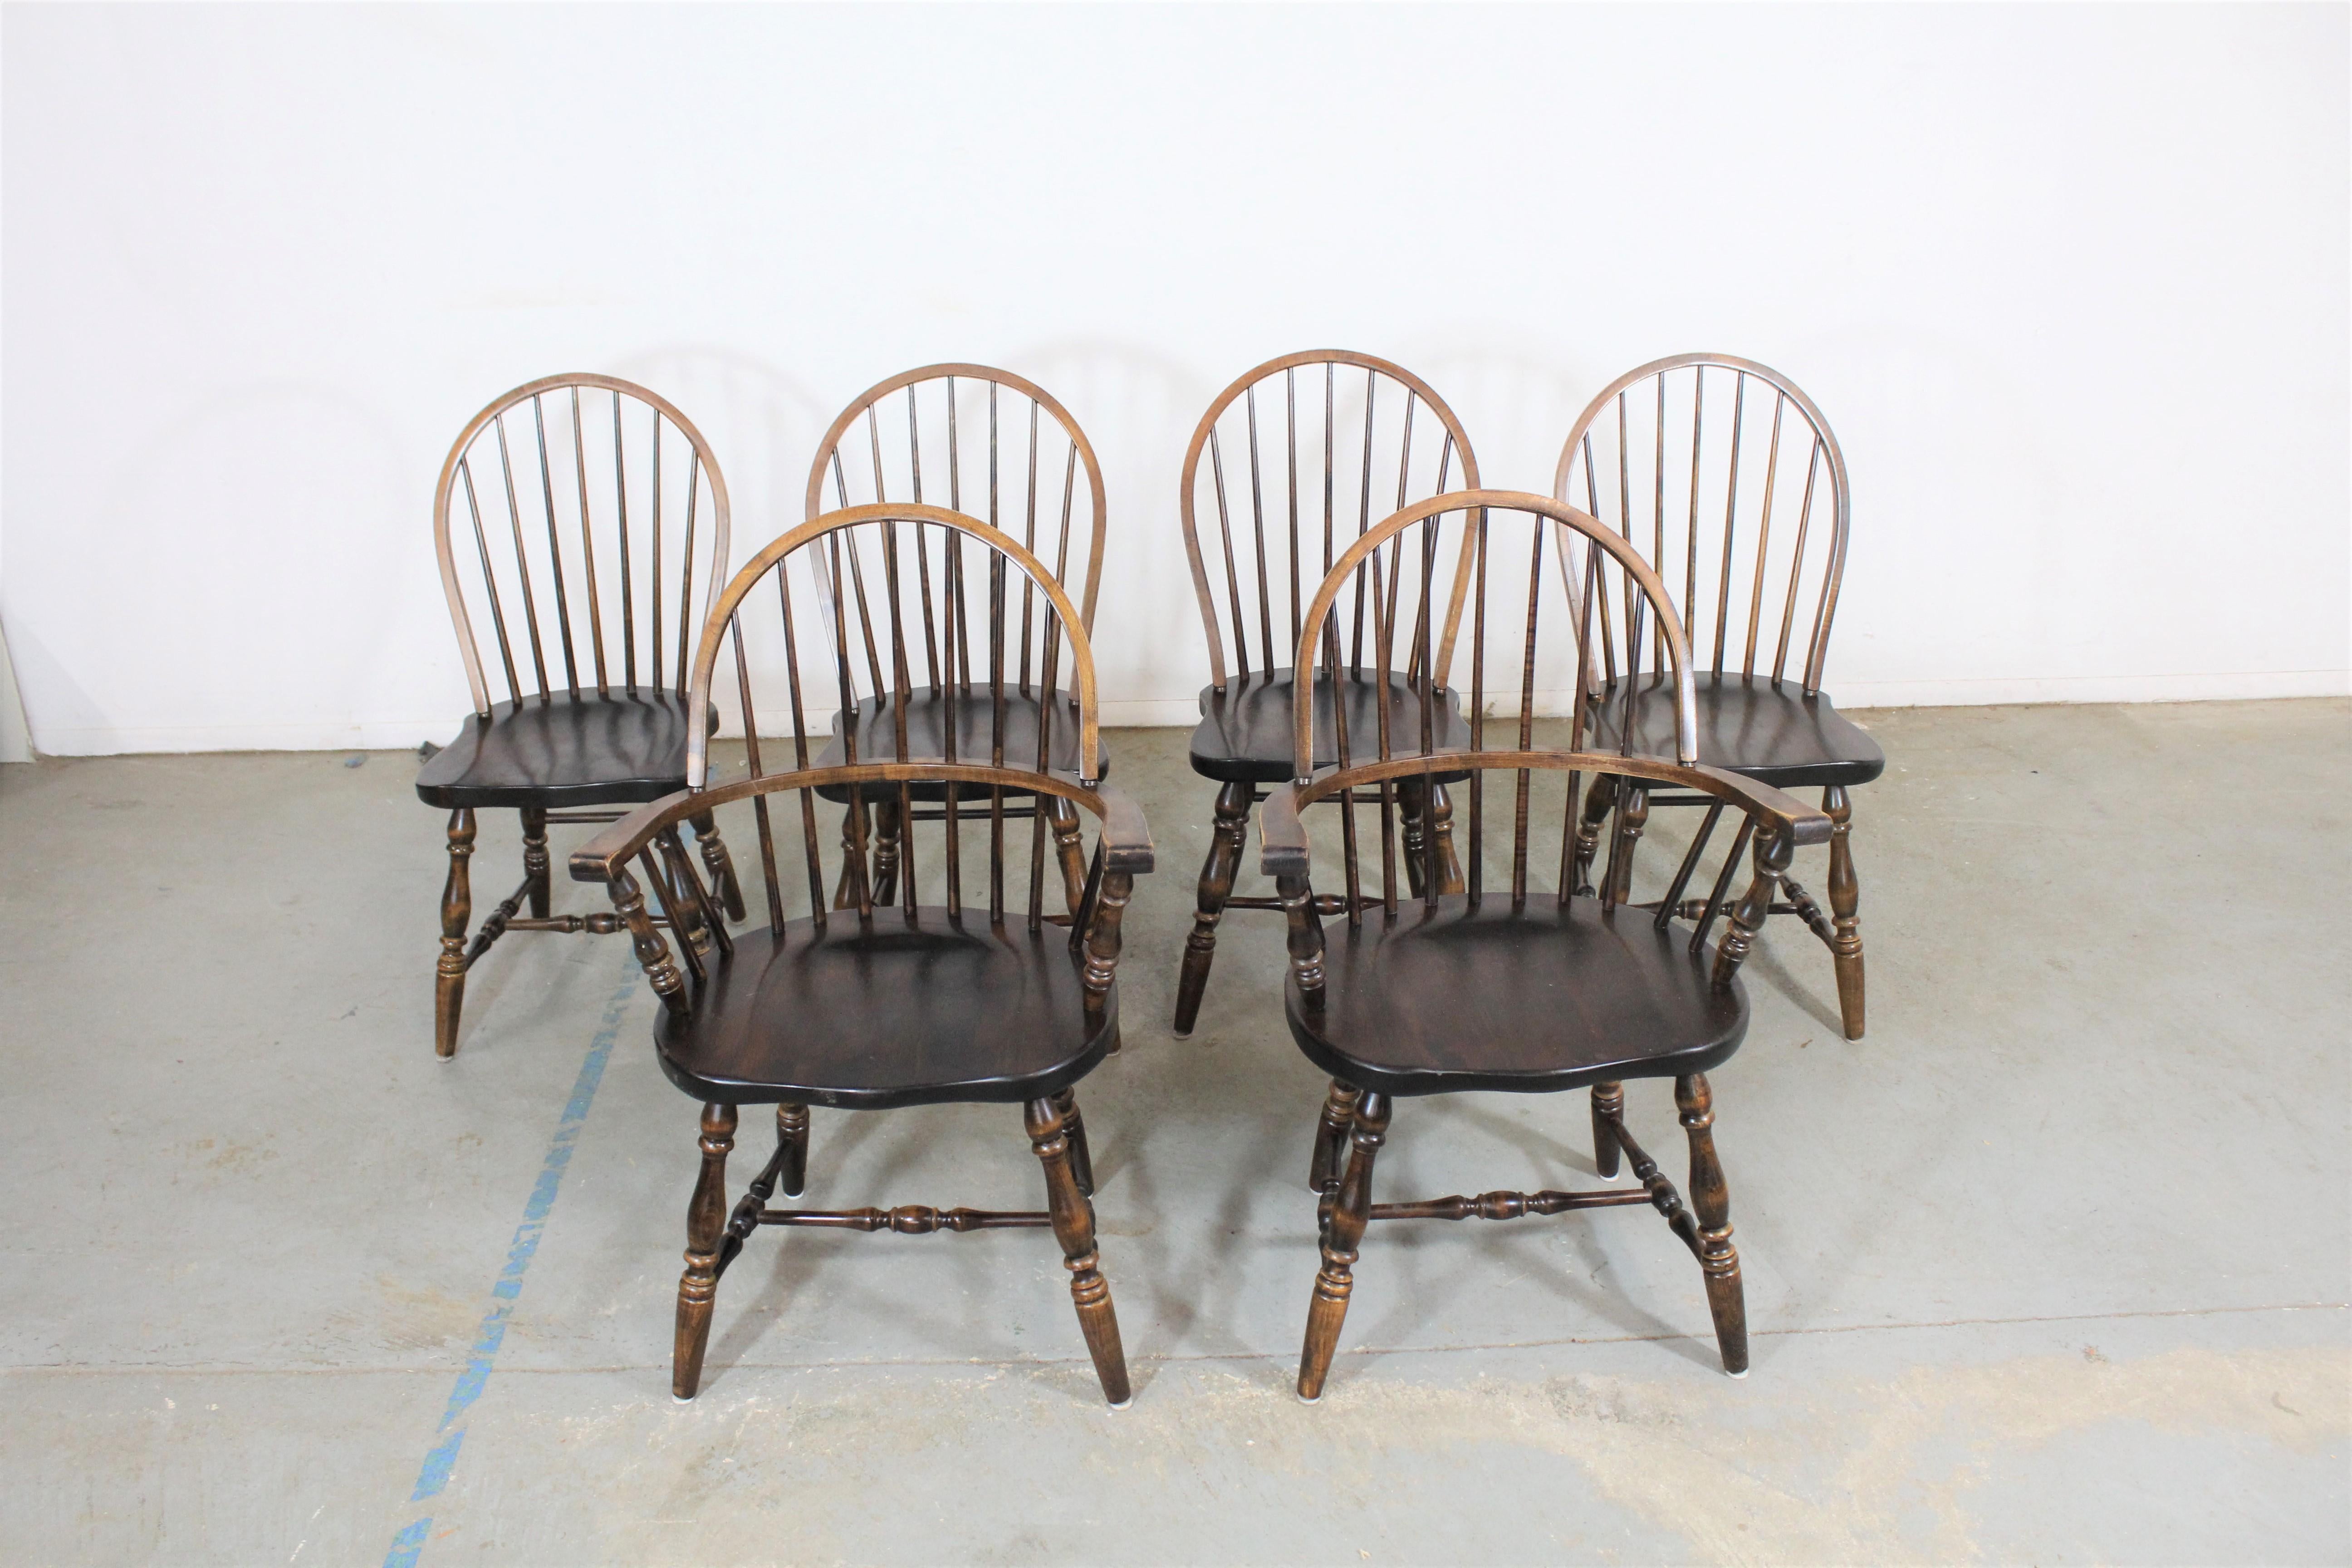 Set of 6 pine hoop back Windsor chairs
What a find. Offered is a set of 6 Windsor chairs in Ethan Allen style. They are not signed. The chairs have scratches on the seat and the legs. See photos for details.

Approximate dimensions:
4 regular